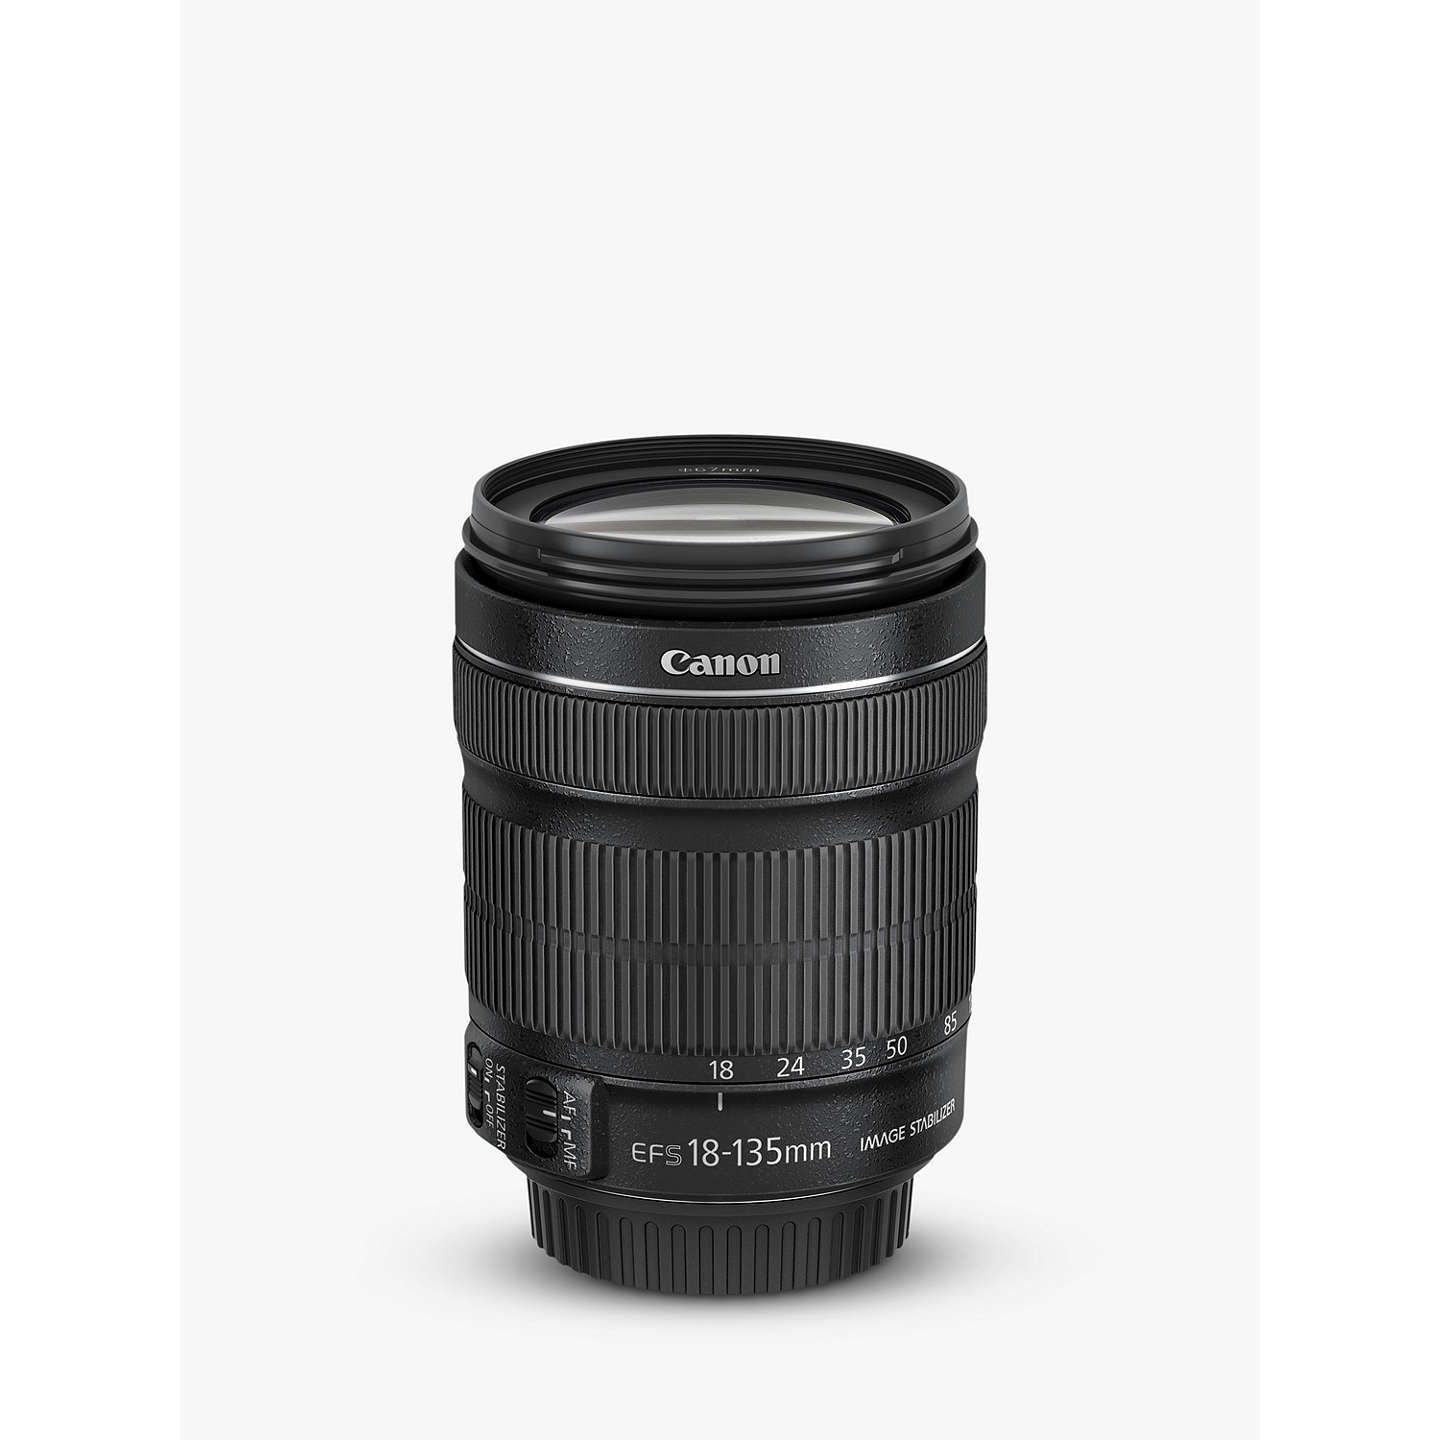 Canon EF-S 18-135mm f/3.5-5.6 IS STM Telephoto Lens at John Lewis